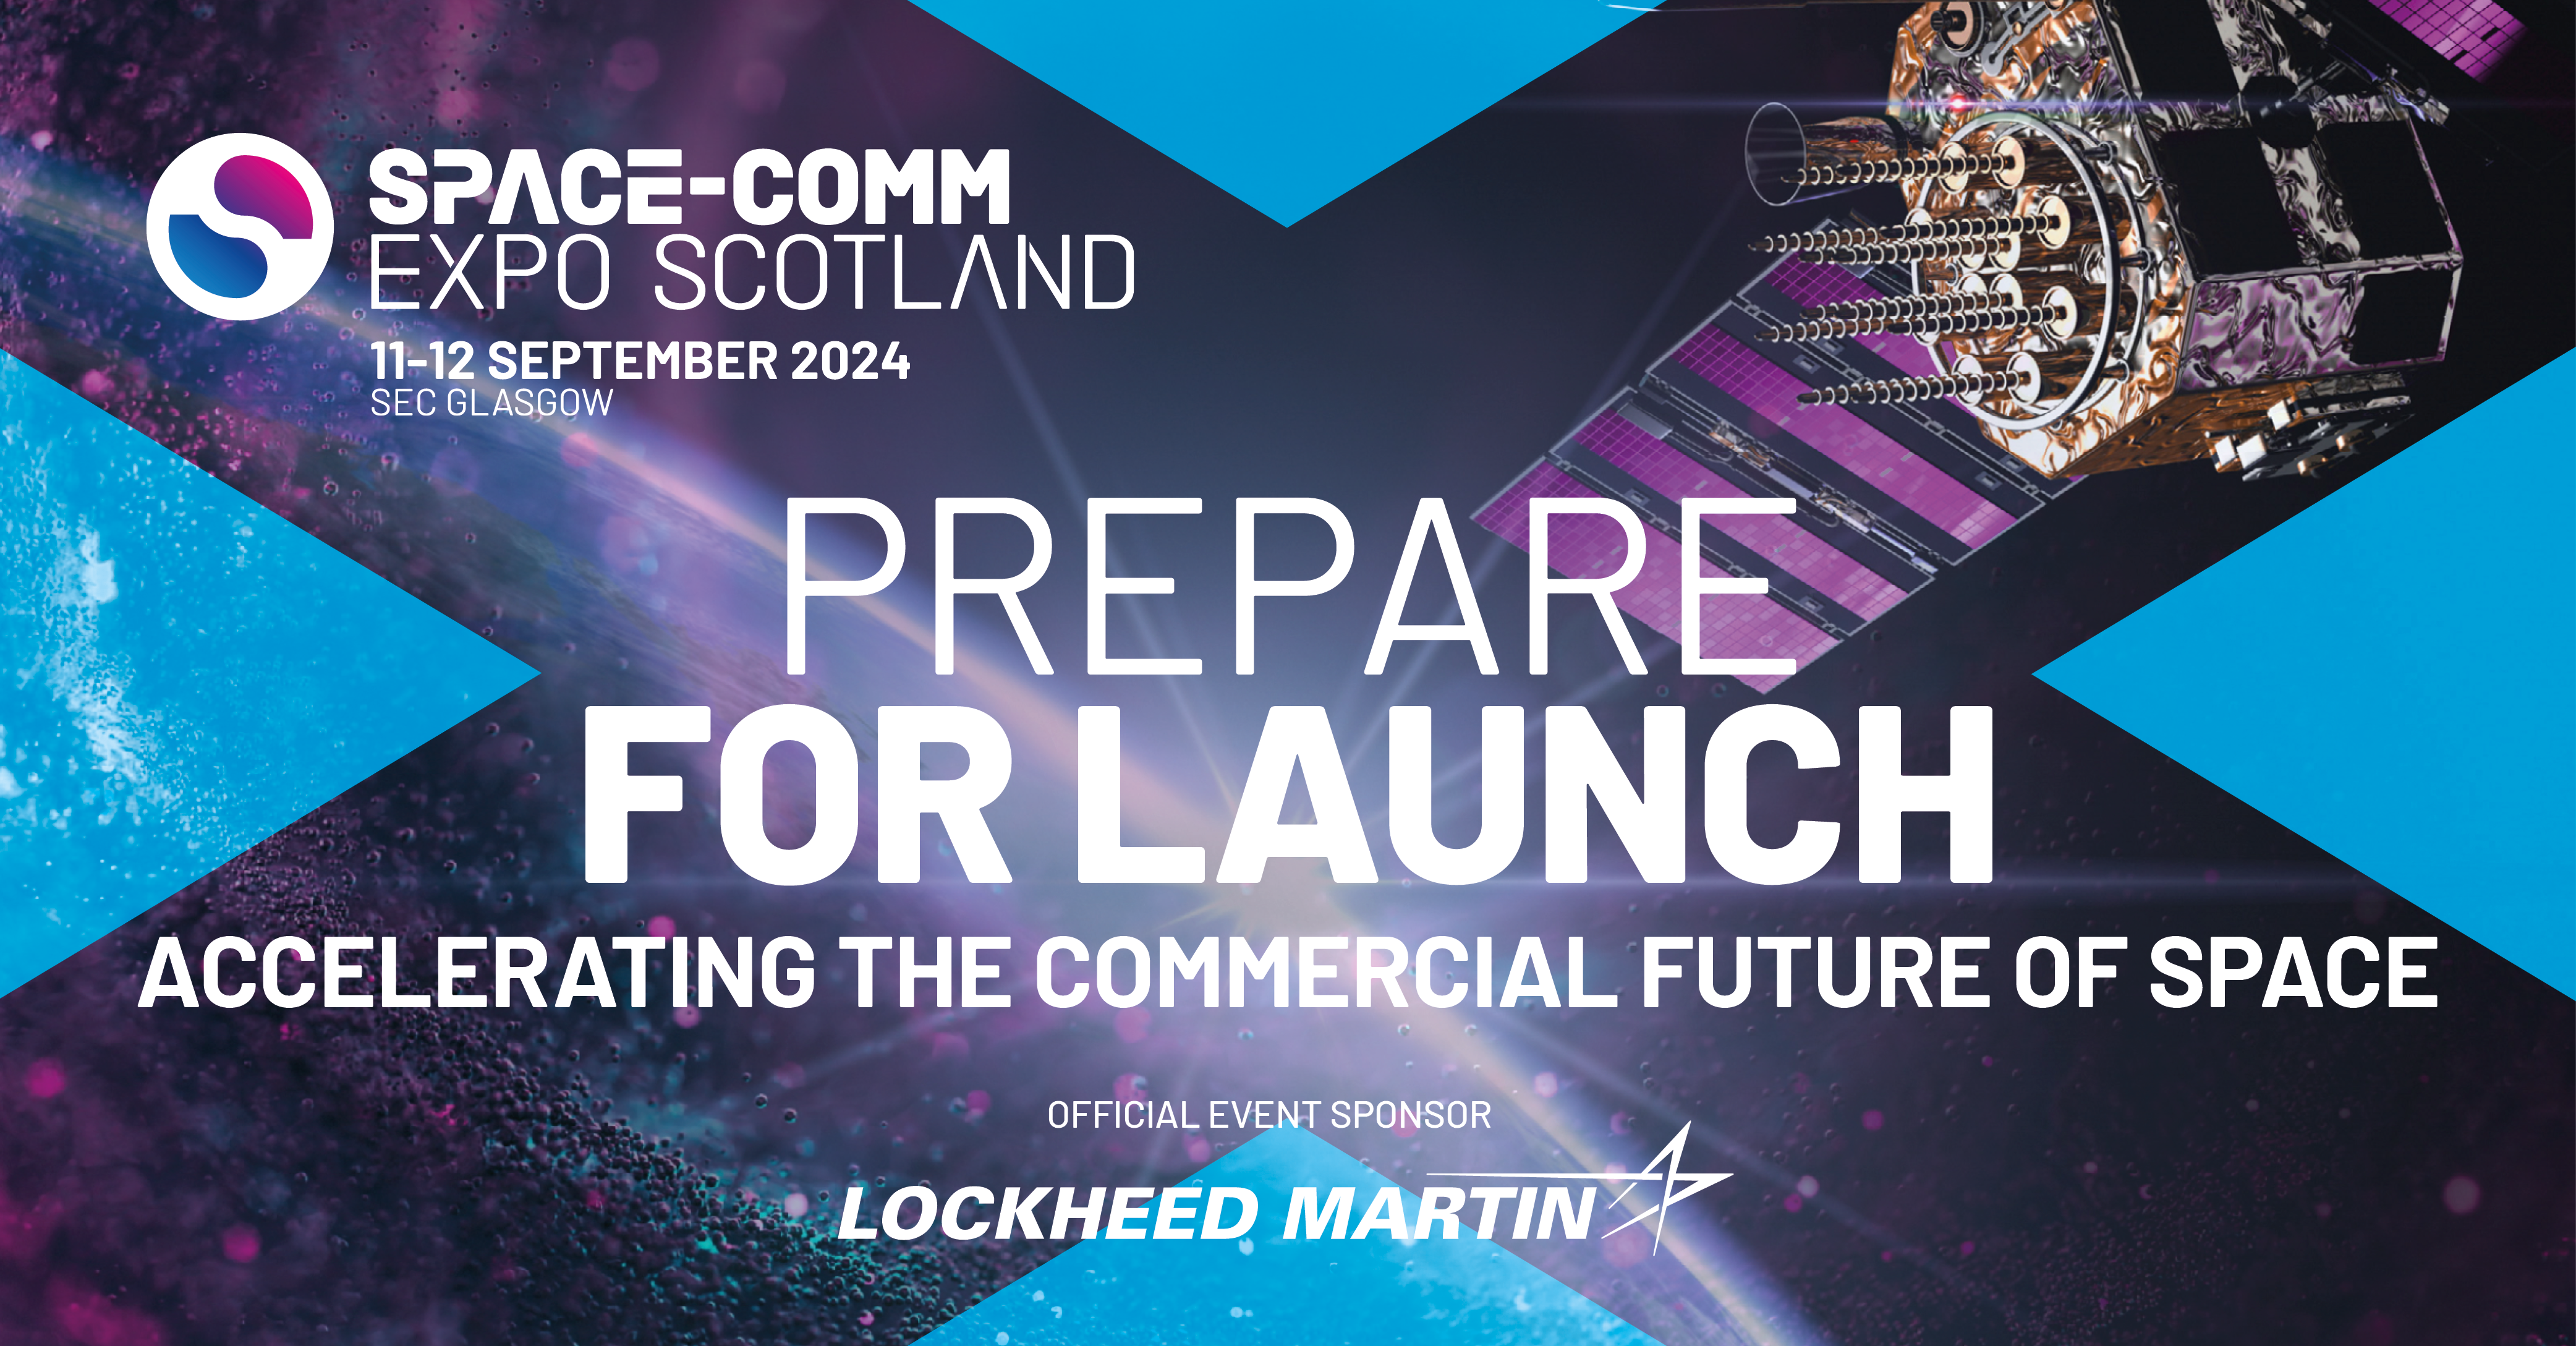 SPACE-COMM EXPO SCOTLAND 2024 REGISTRATION GOES LIVE